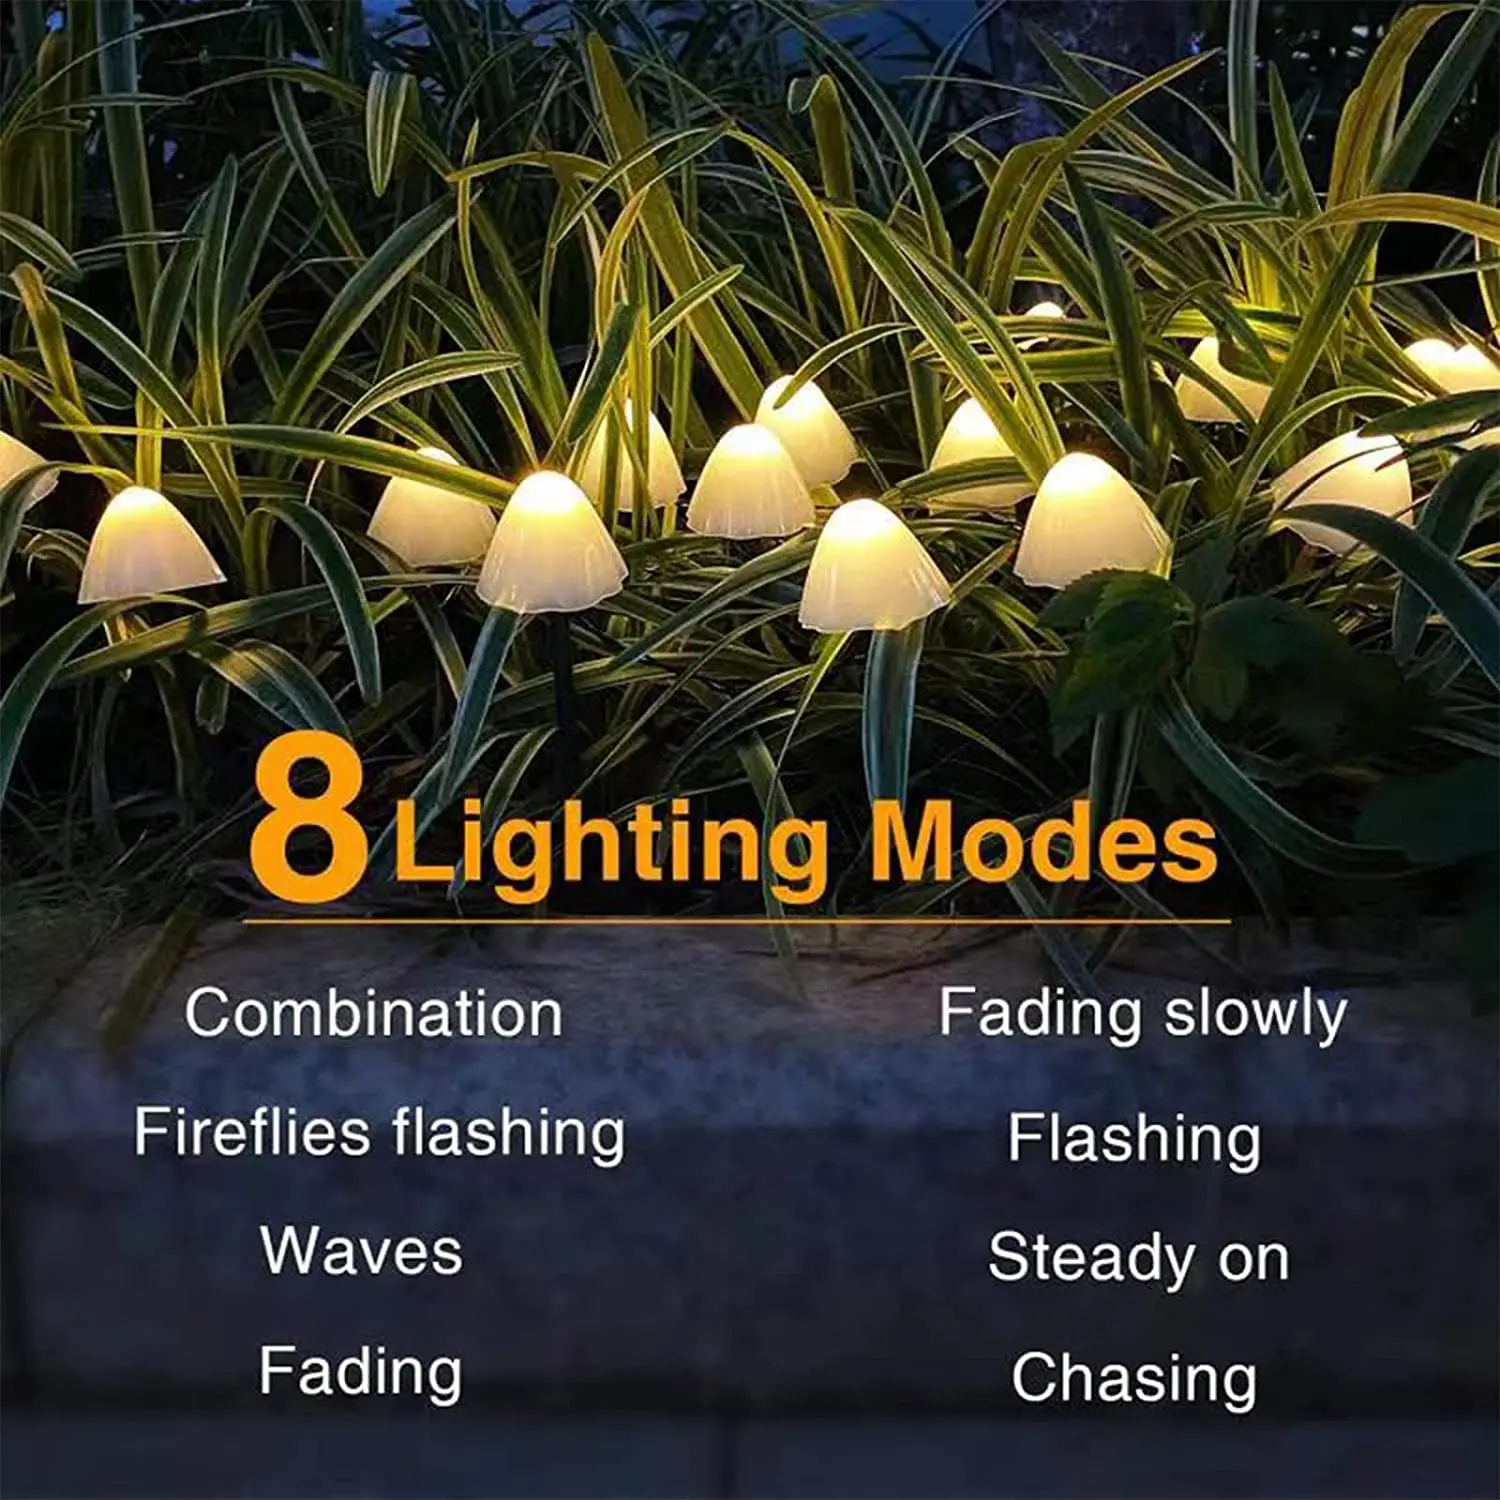 LED Outdoor Solar Garden Lights Mushroom String Lawn Lamps Waterproof Garland Landscape Decoration for Yard/Path/Party/Street images - 6